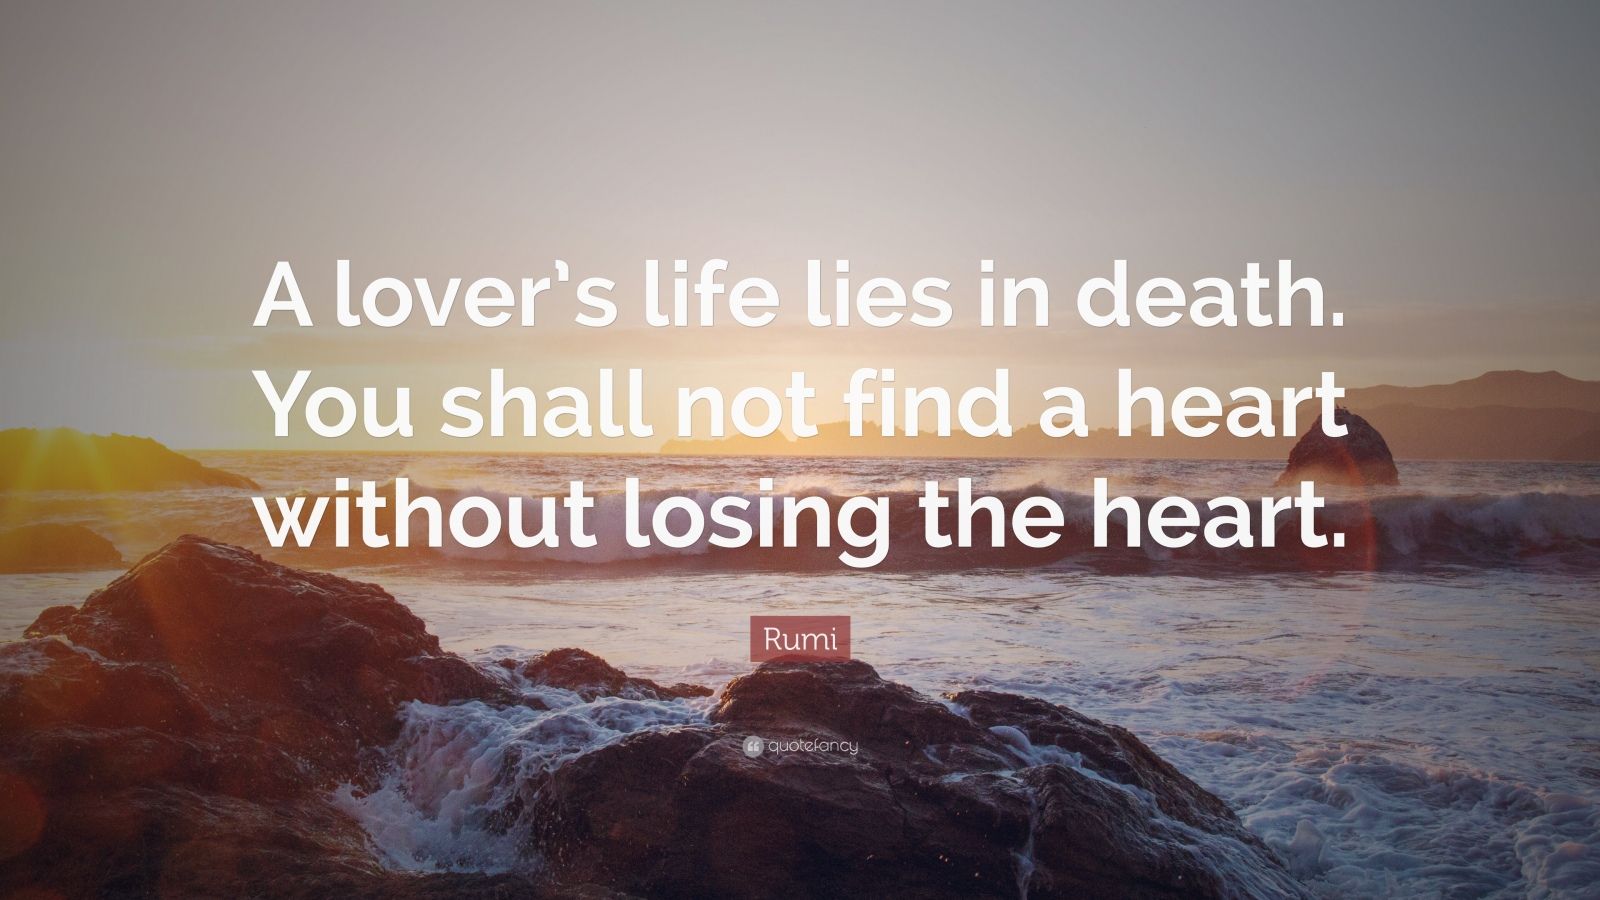 Rumi quote on death